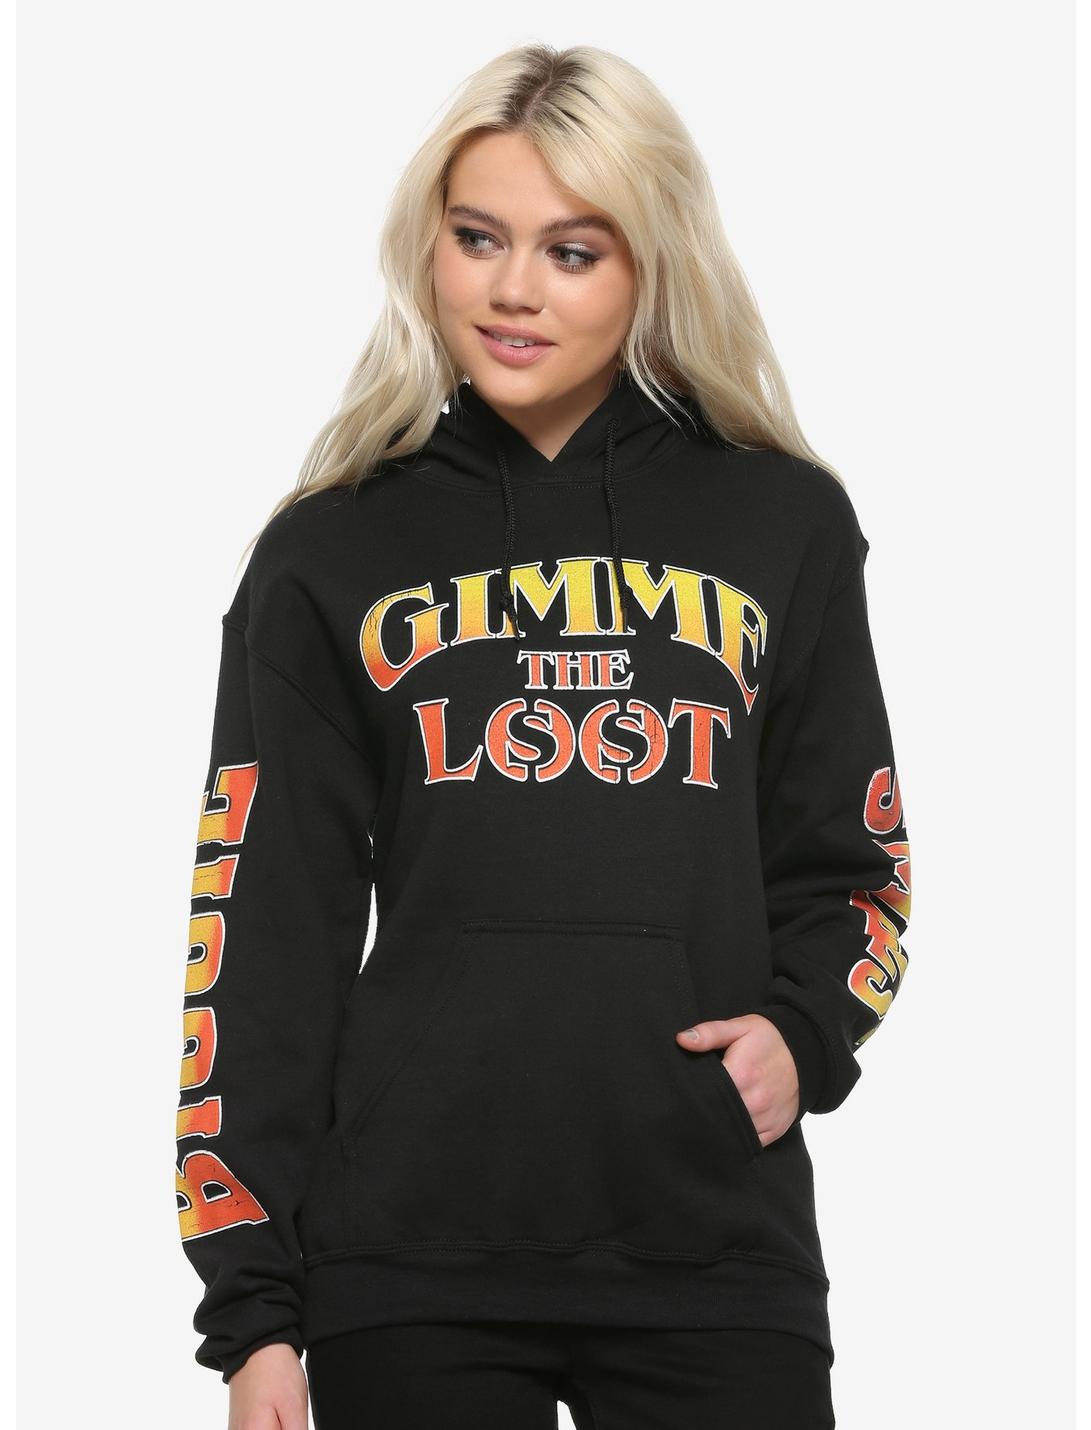 The Notorious B.I.G. Gimme The Loot Girls Hoodie, BLACK, hi-res